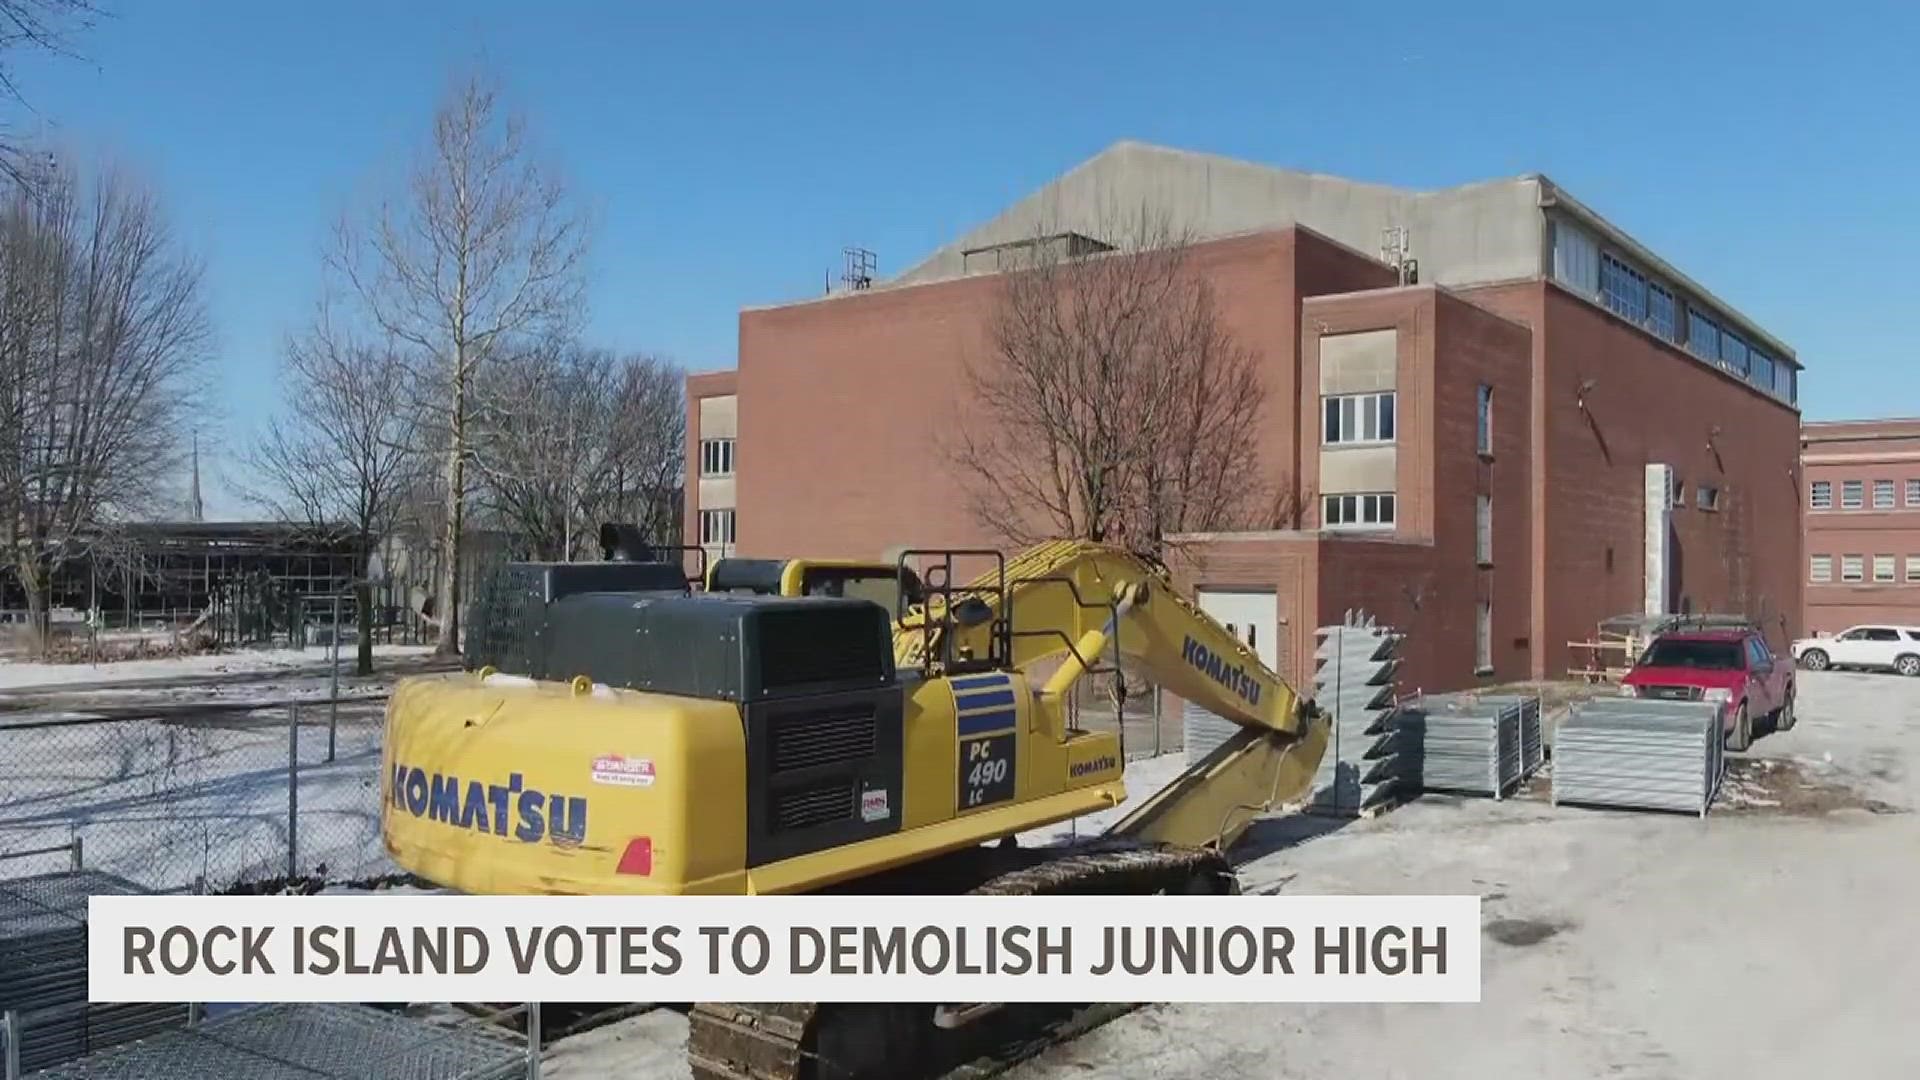 The school board voted Wednesday night to approve a nearly $500,000 contract for demolition.